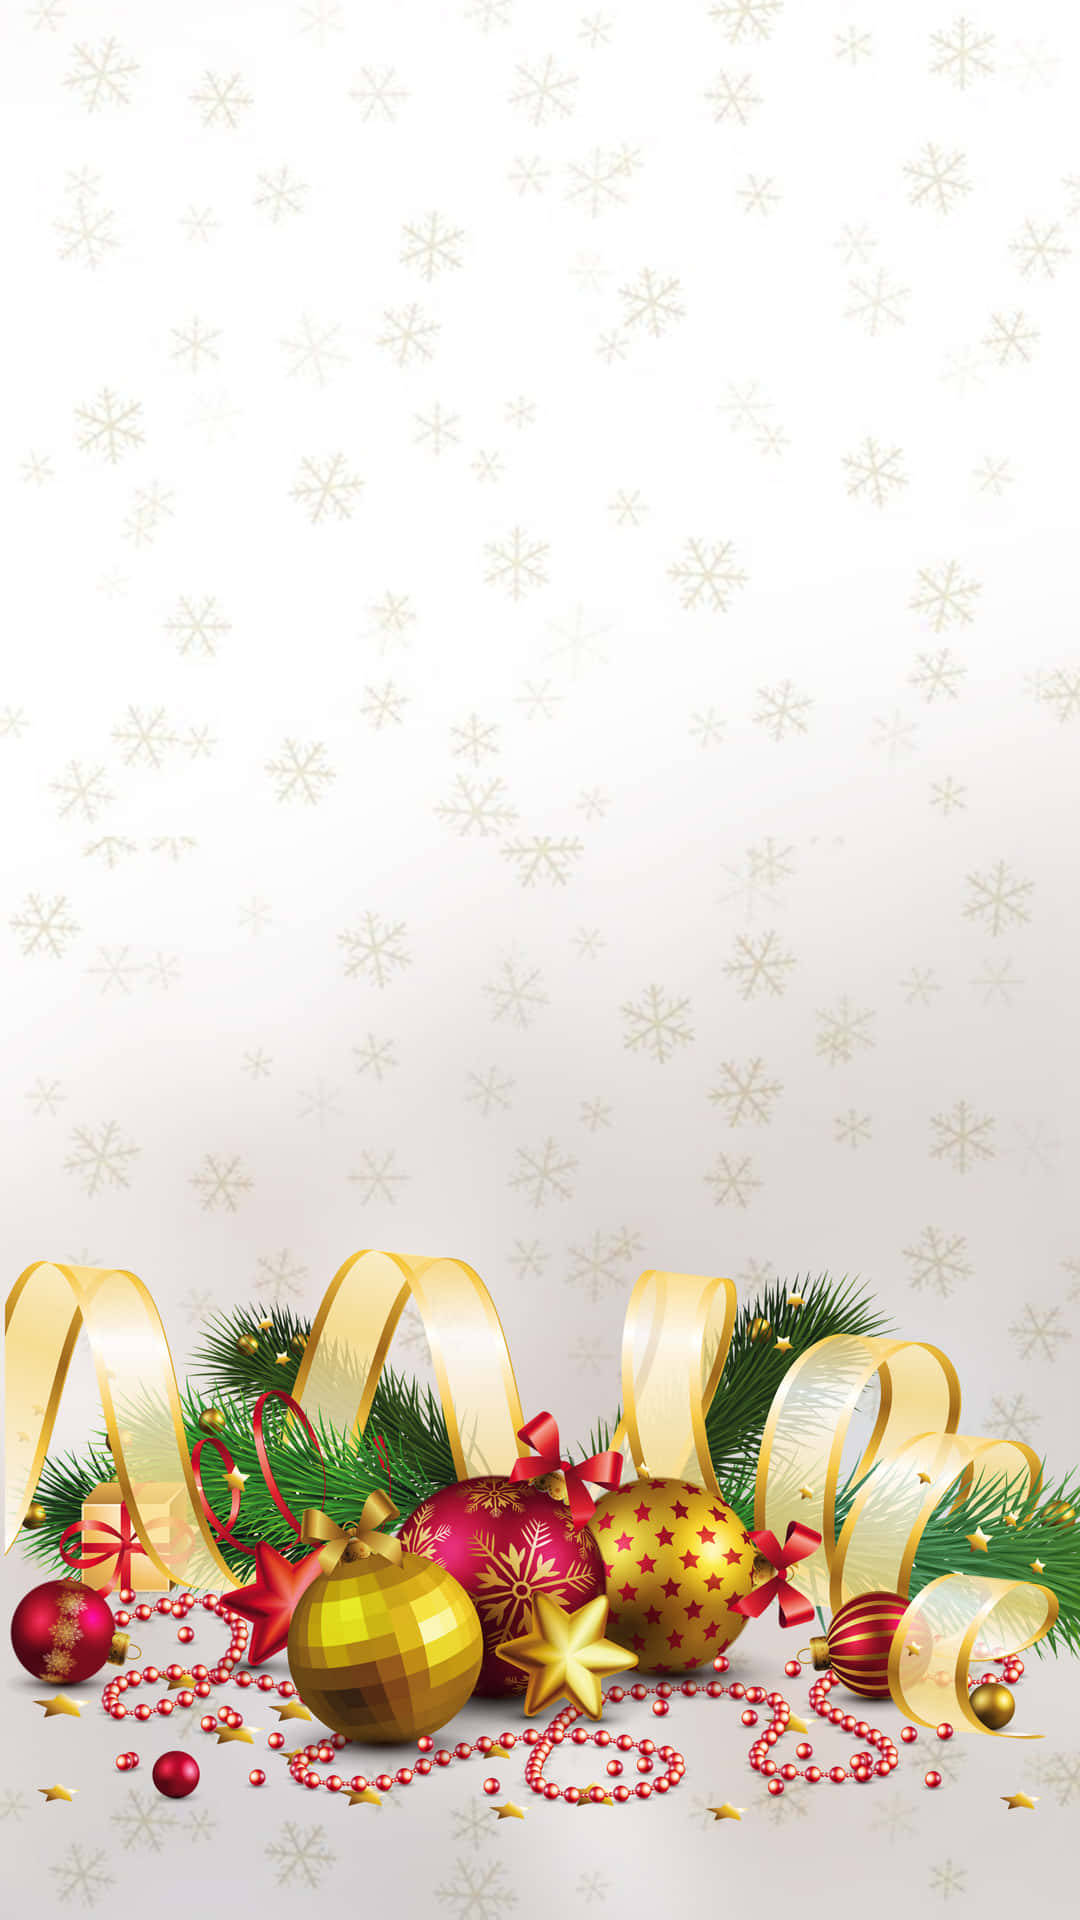 Festive Christmas Background with Snowflakes and Ornaments Wallpaper